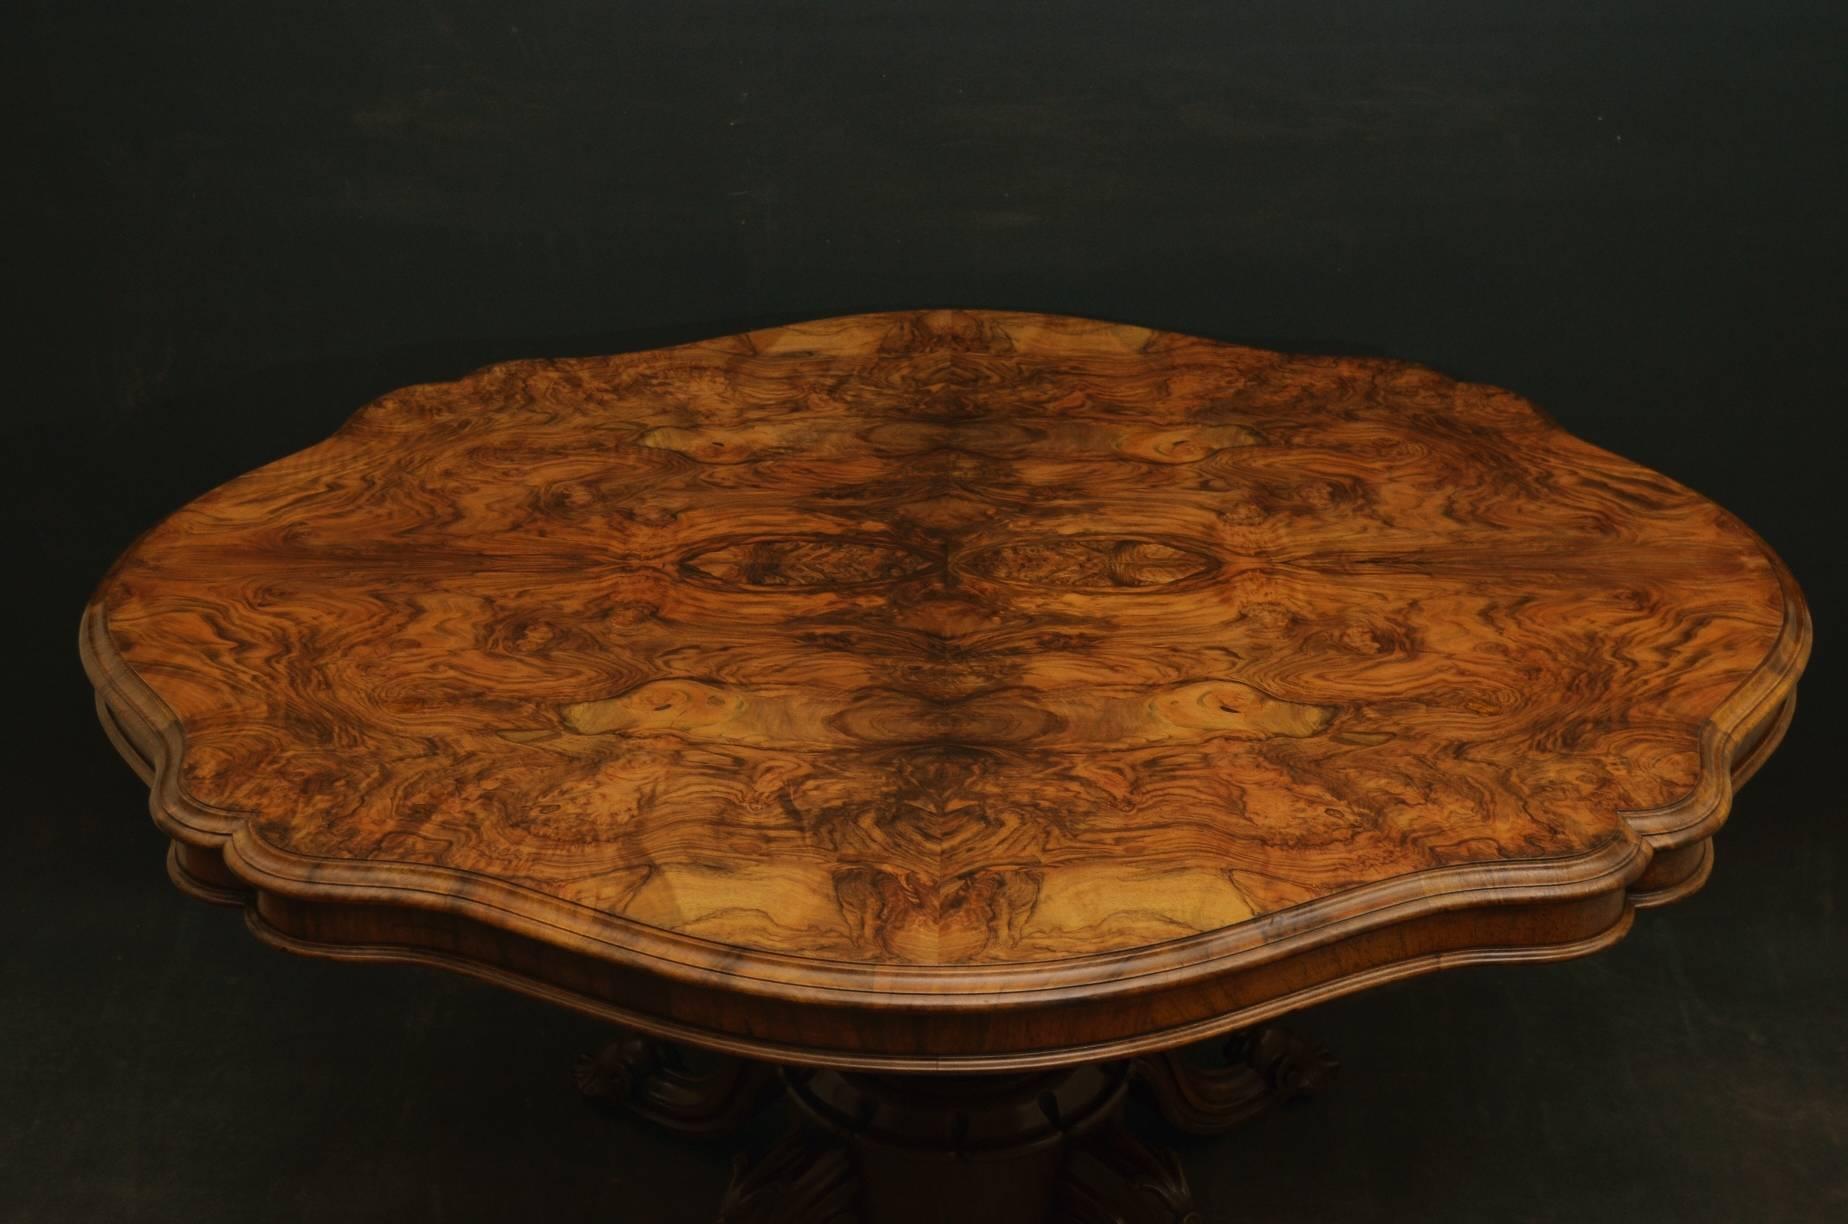 Sn3599, magnificent Victorian, figured walnut centre table, with beautifully figured shaped, tilt top and moulded edge, standing on vase shaped fluted column terminating in four carved cabriole legs and original brass castors. This fine example of